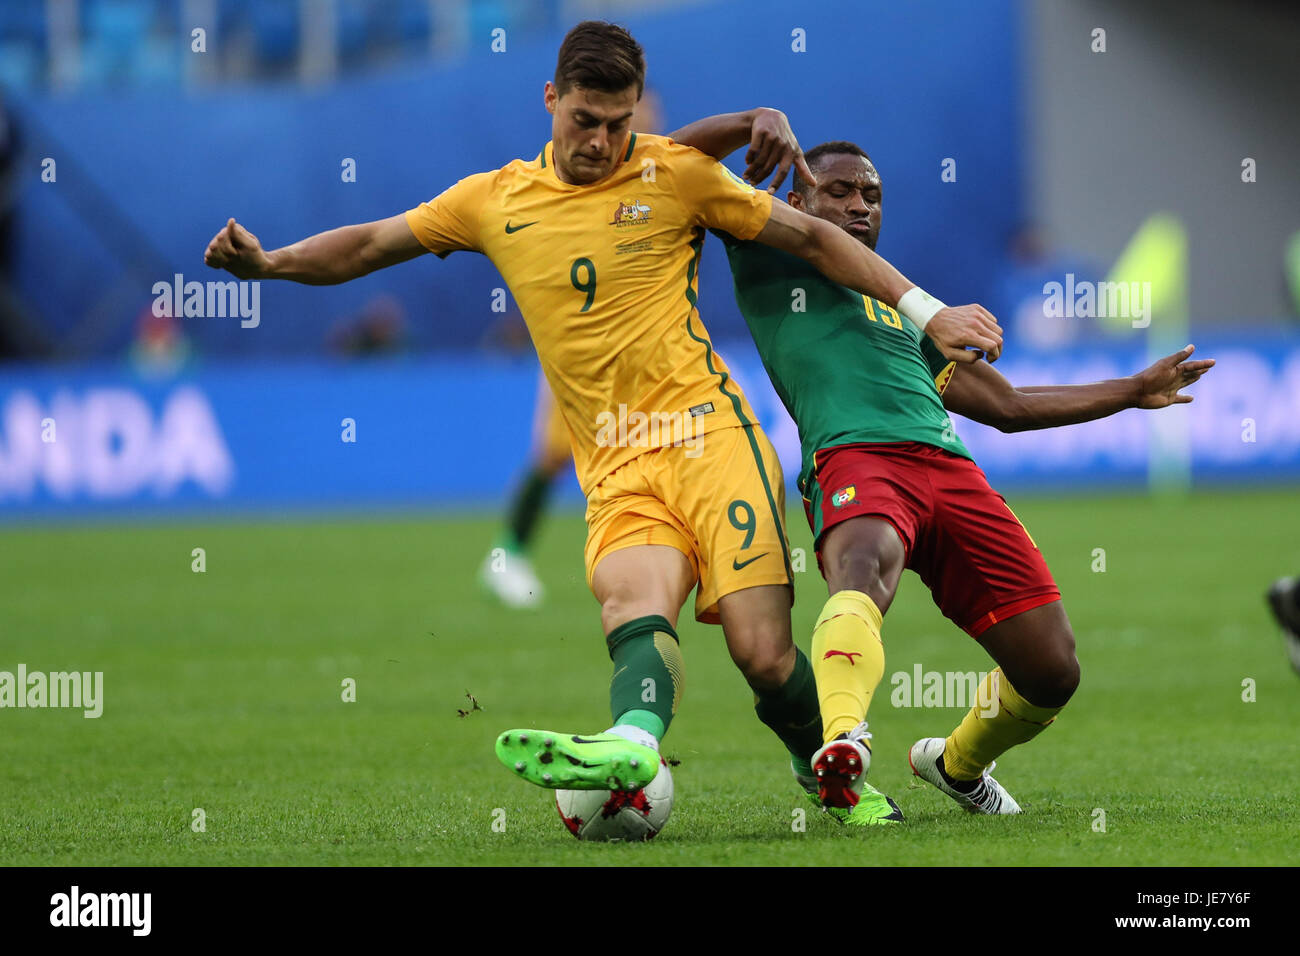 St. Petersburg, Russia. 22nd June, 2017. Sebastien Siani(R) of Cameroon vies with Tomi Juric of Australia during the group B match between Cameroon and Australia at the 2017 FIFA Confederations Cup in St. Petersburg, Russia, on June 22, 2017. The match ended with a 1-1 draw. Credit: Wu Zhuang/Xinhua/Alamy Live News Stock Photo